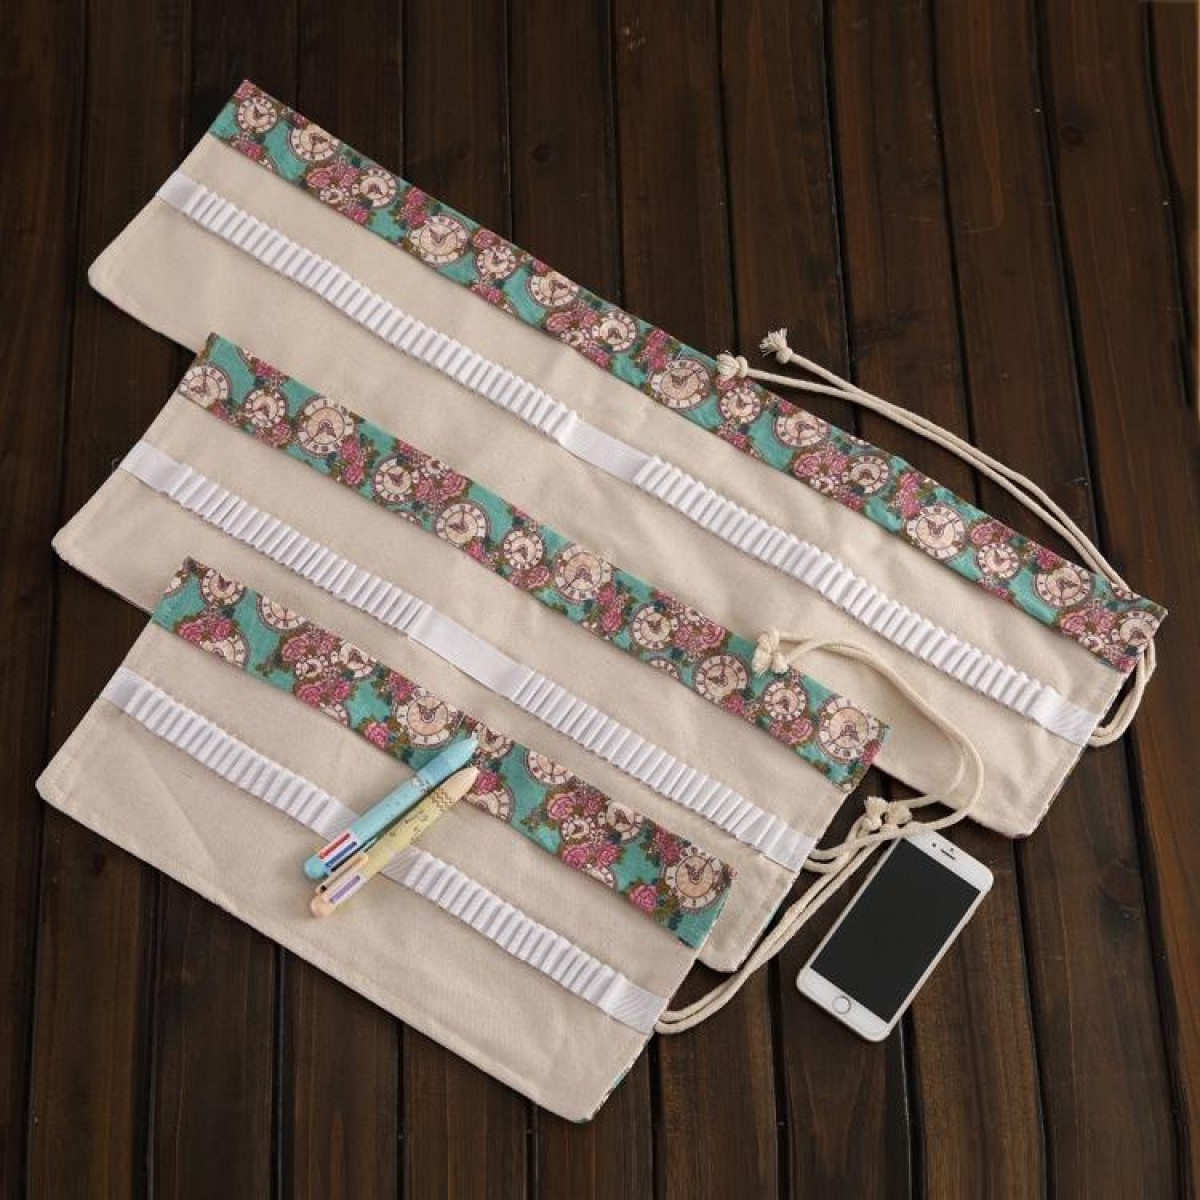 72 Slots Rose Clock Print Pen Bag Canvas Pencil Wrap Curtain Roll Up Pencil Case Stationery Pouch